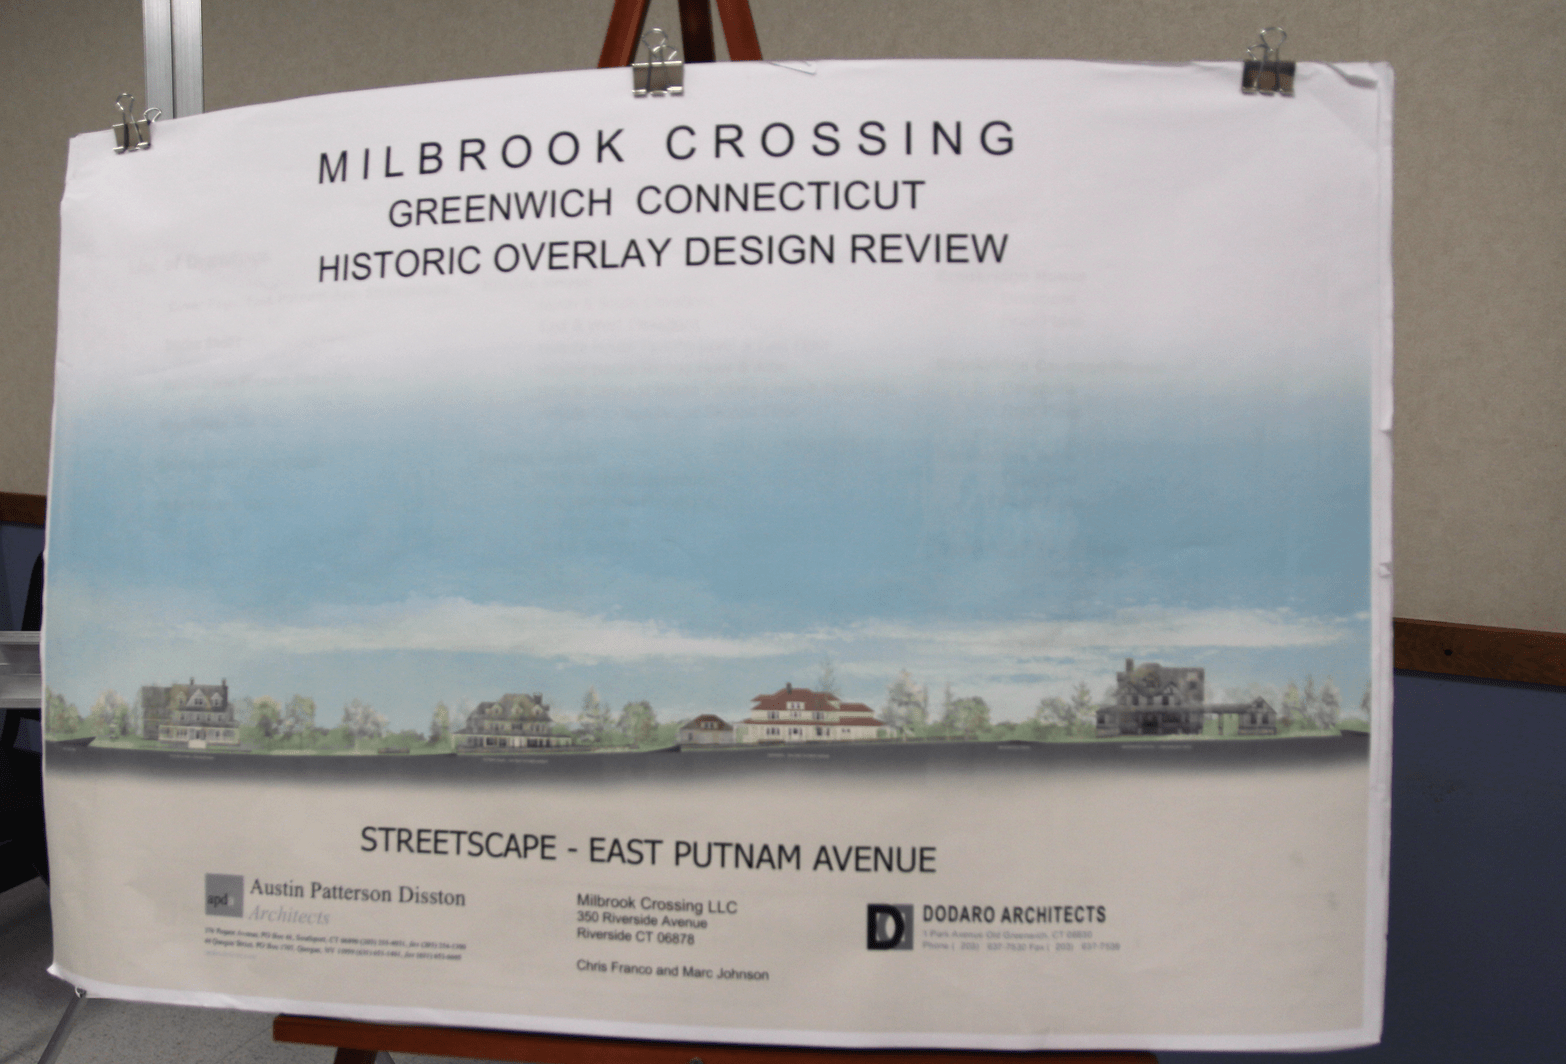 Last week the Historic District Commission voted unanimously to recommend Milbrook Crossing for a certificate of appropriateness. The project will eventually go before the Inland Wetlands Agency and Planning & Zoning for approvals.